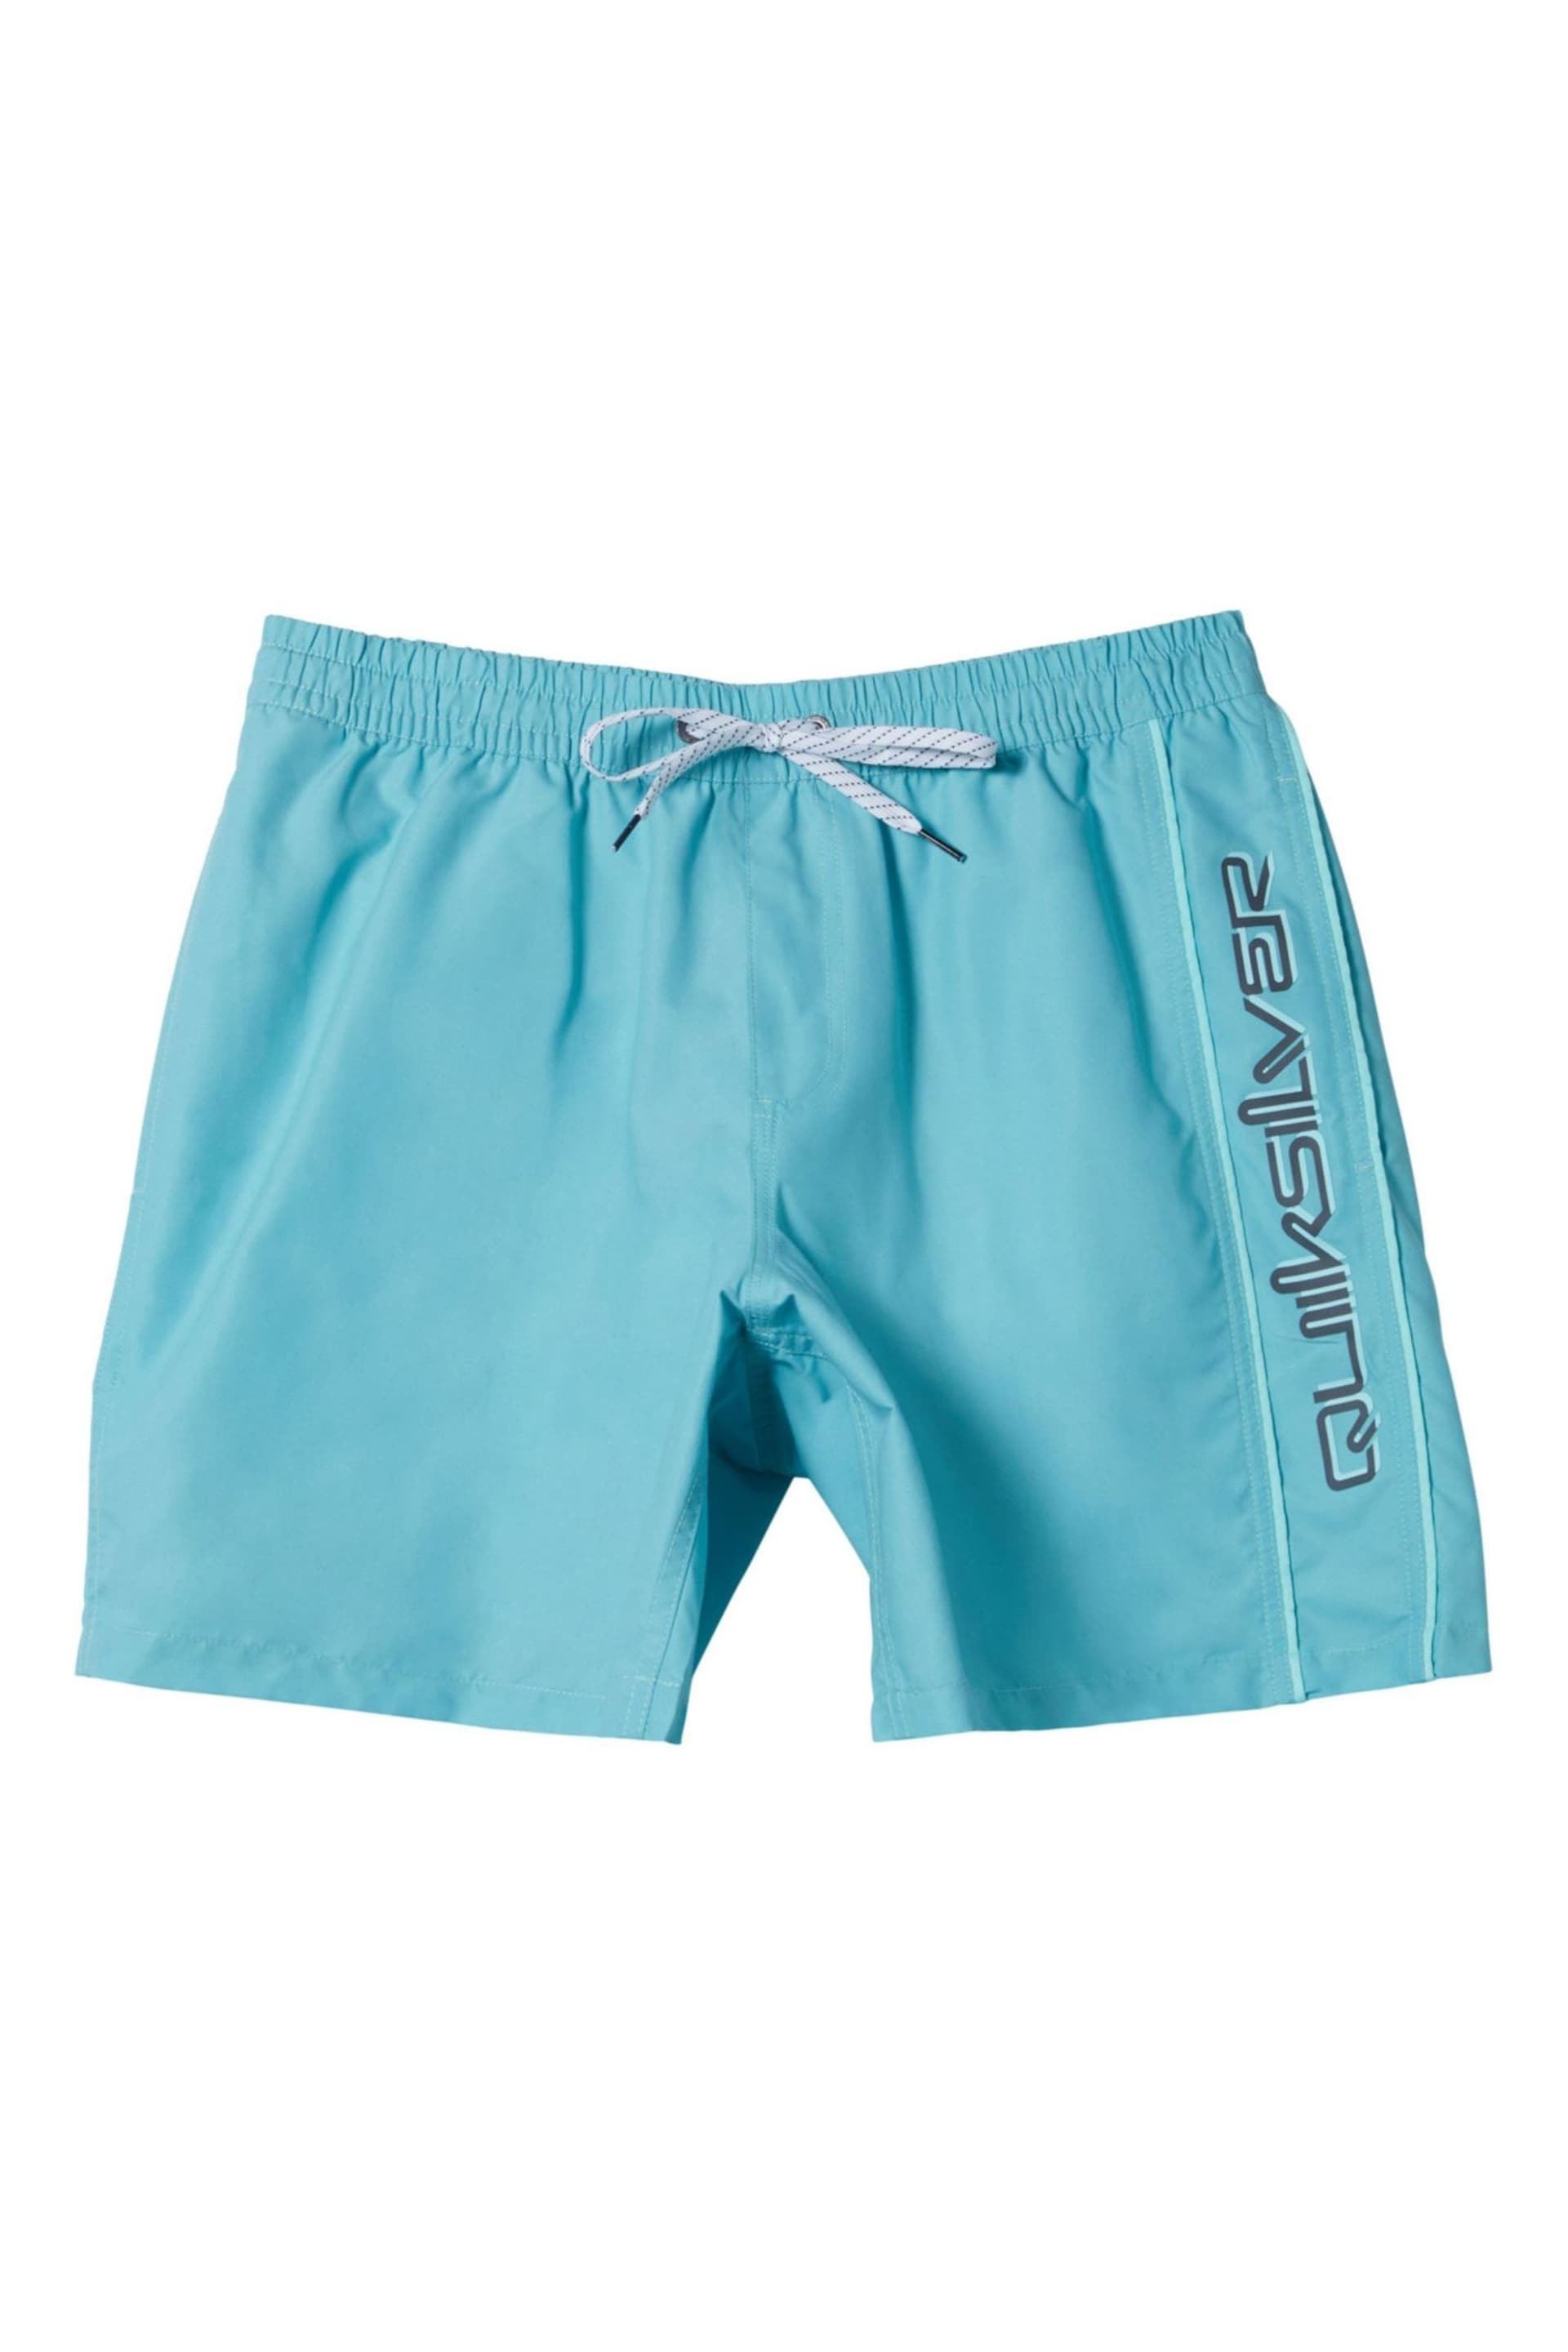 Quiksilver Blue Logo Volley Shorts - Image 6 of 7